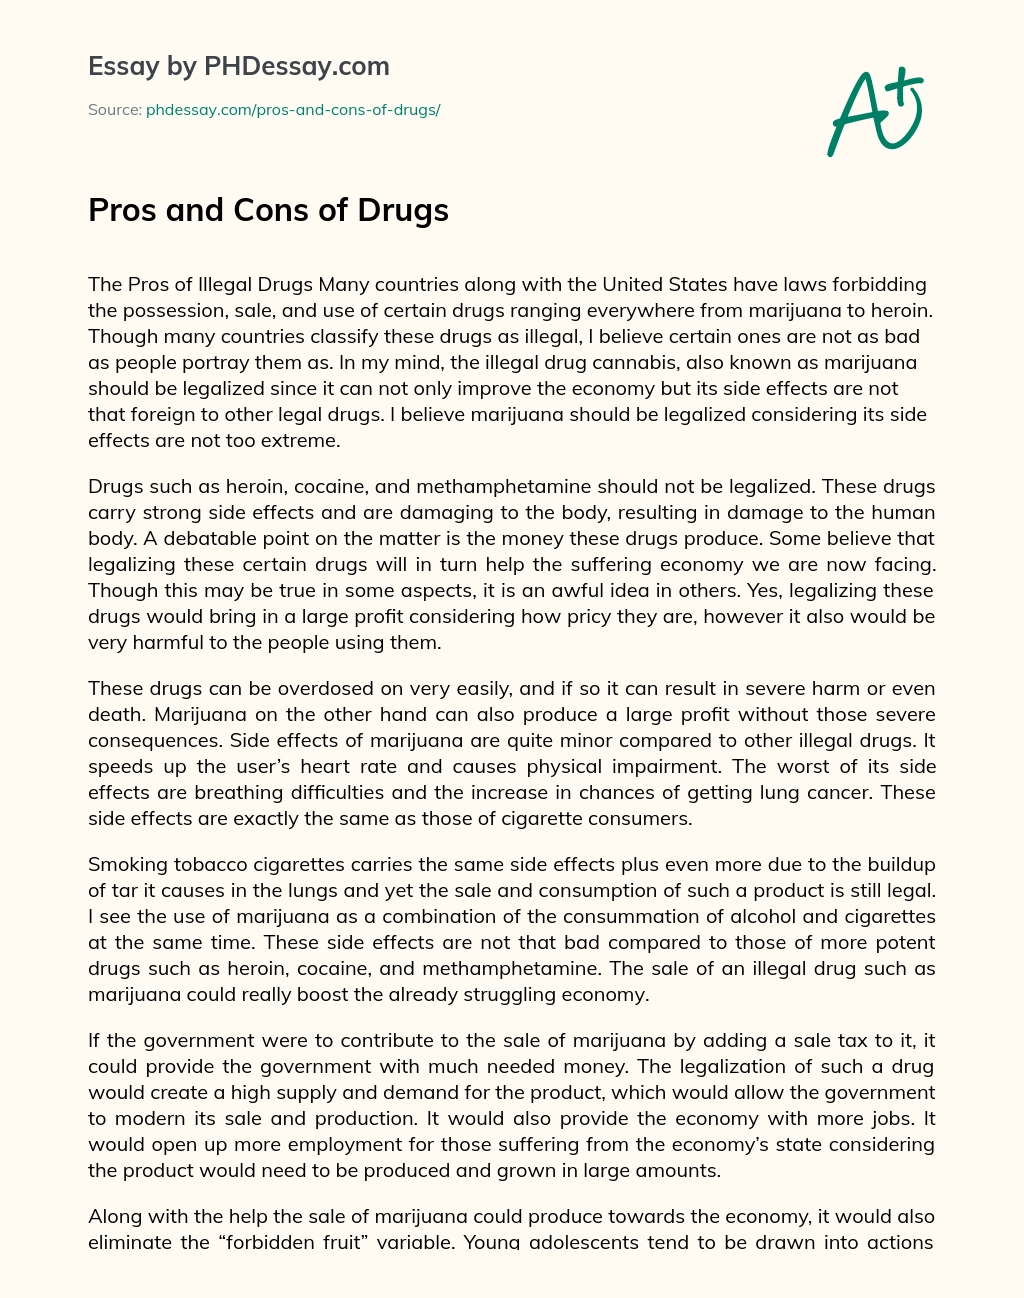 Pros and Cons of Drugs essay